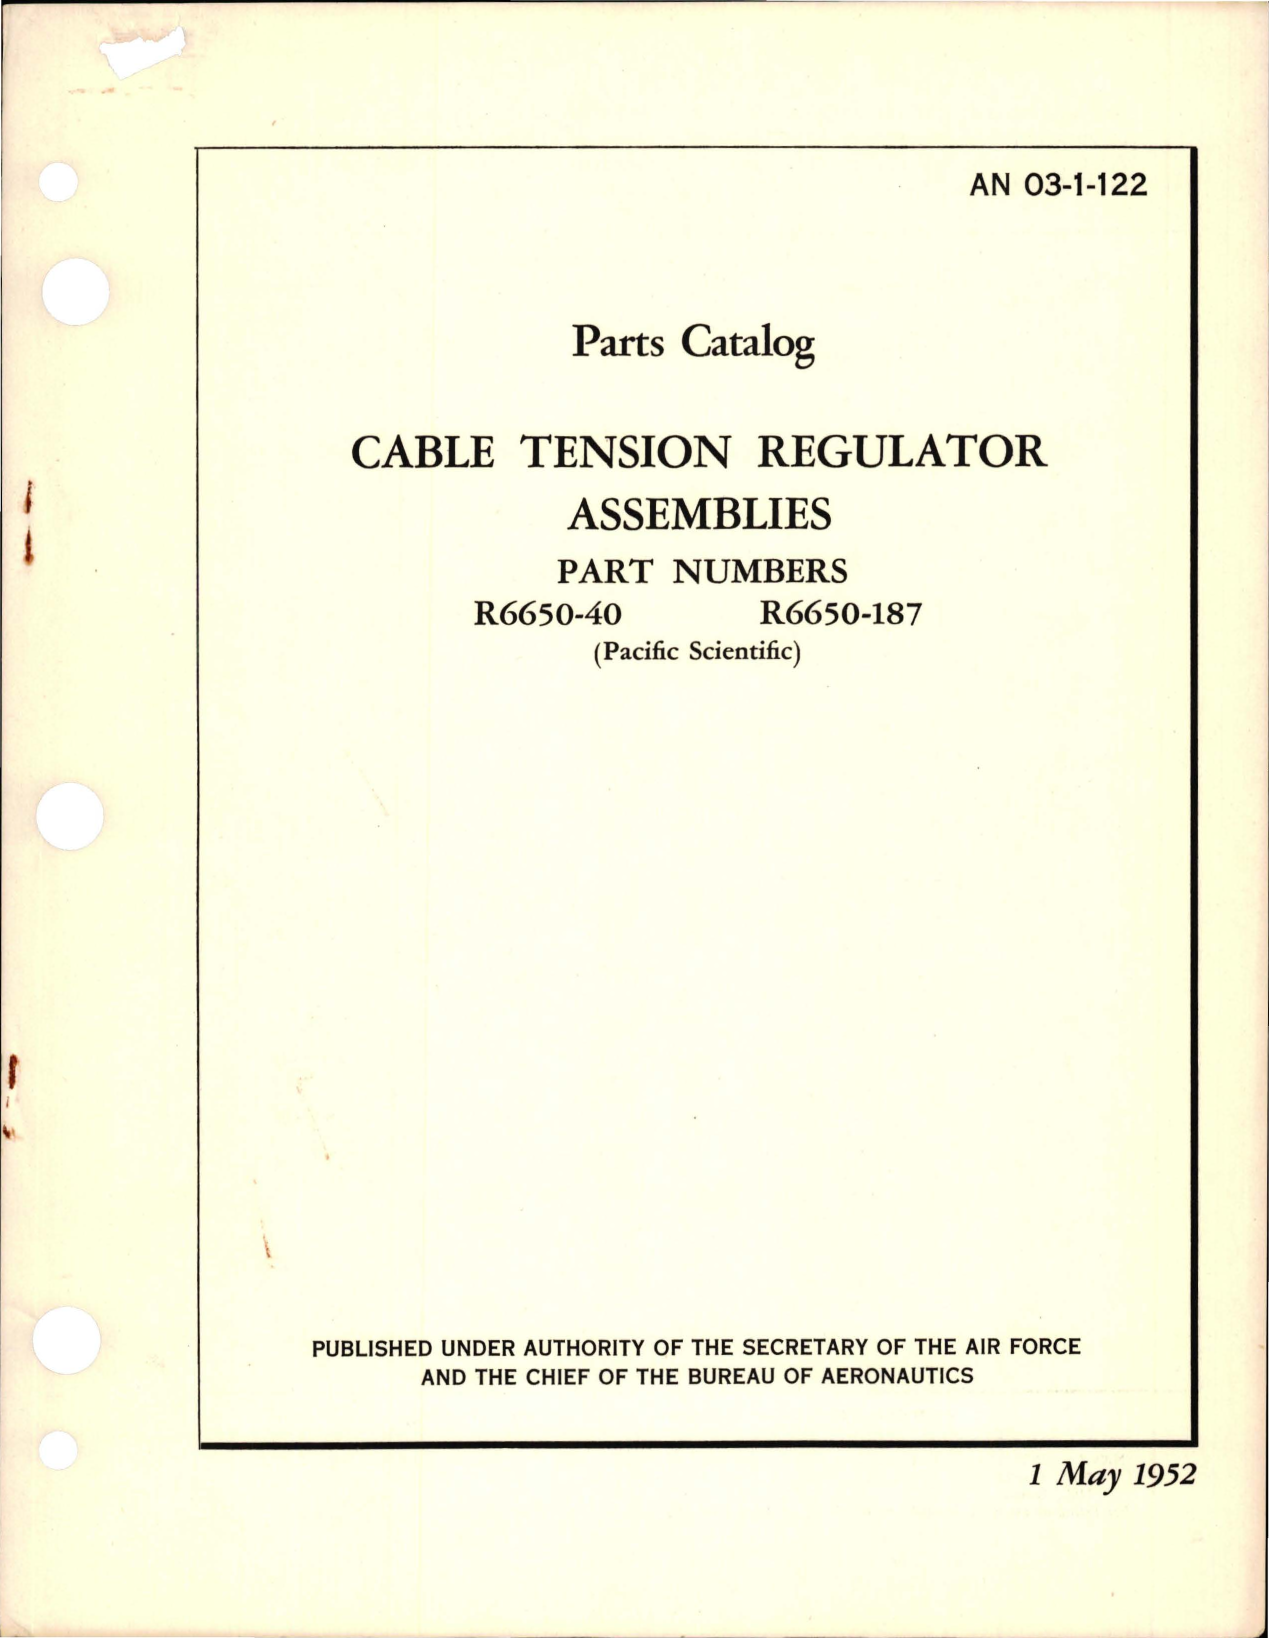 Sample page 1 from AirCorps Library document: Cable Tension Regulator Assemblies - Parts R6650-40 and R6650-187